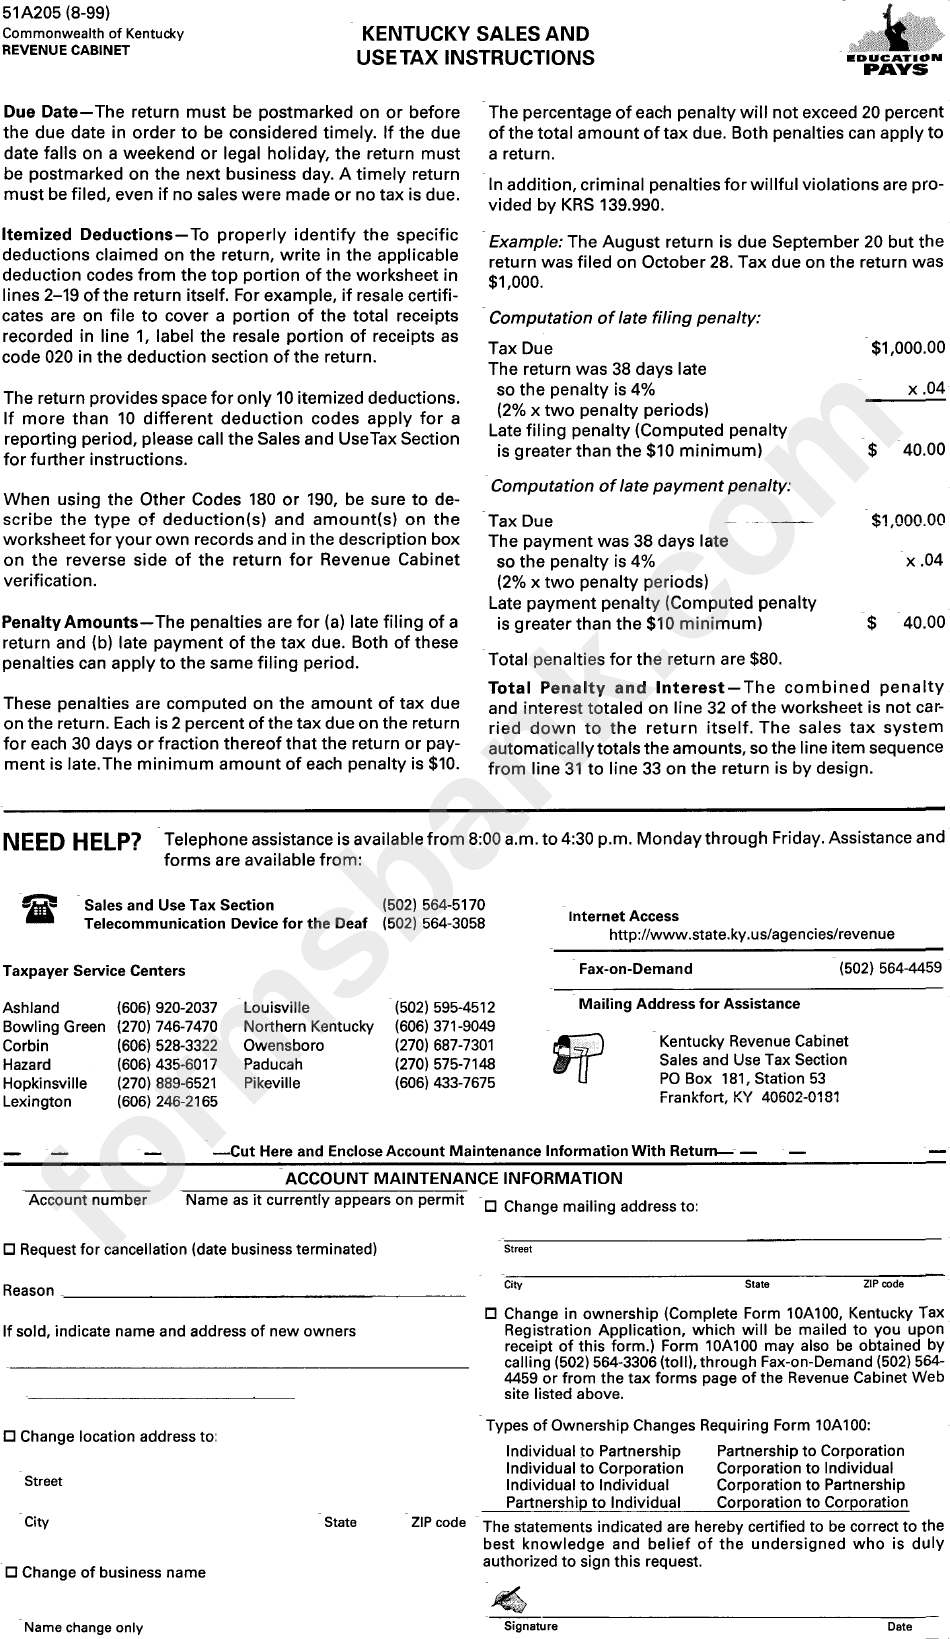 form-51a205-kentucky-sales-and-use-tax-instructions-printable-pdf